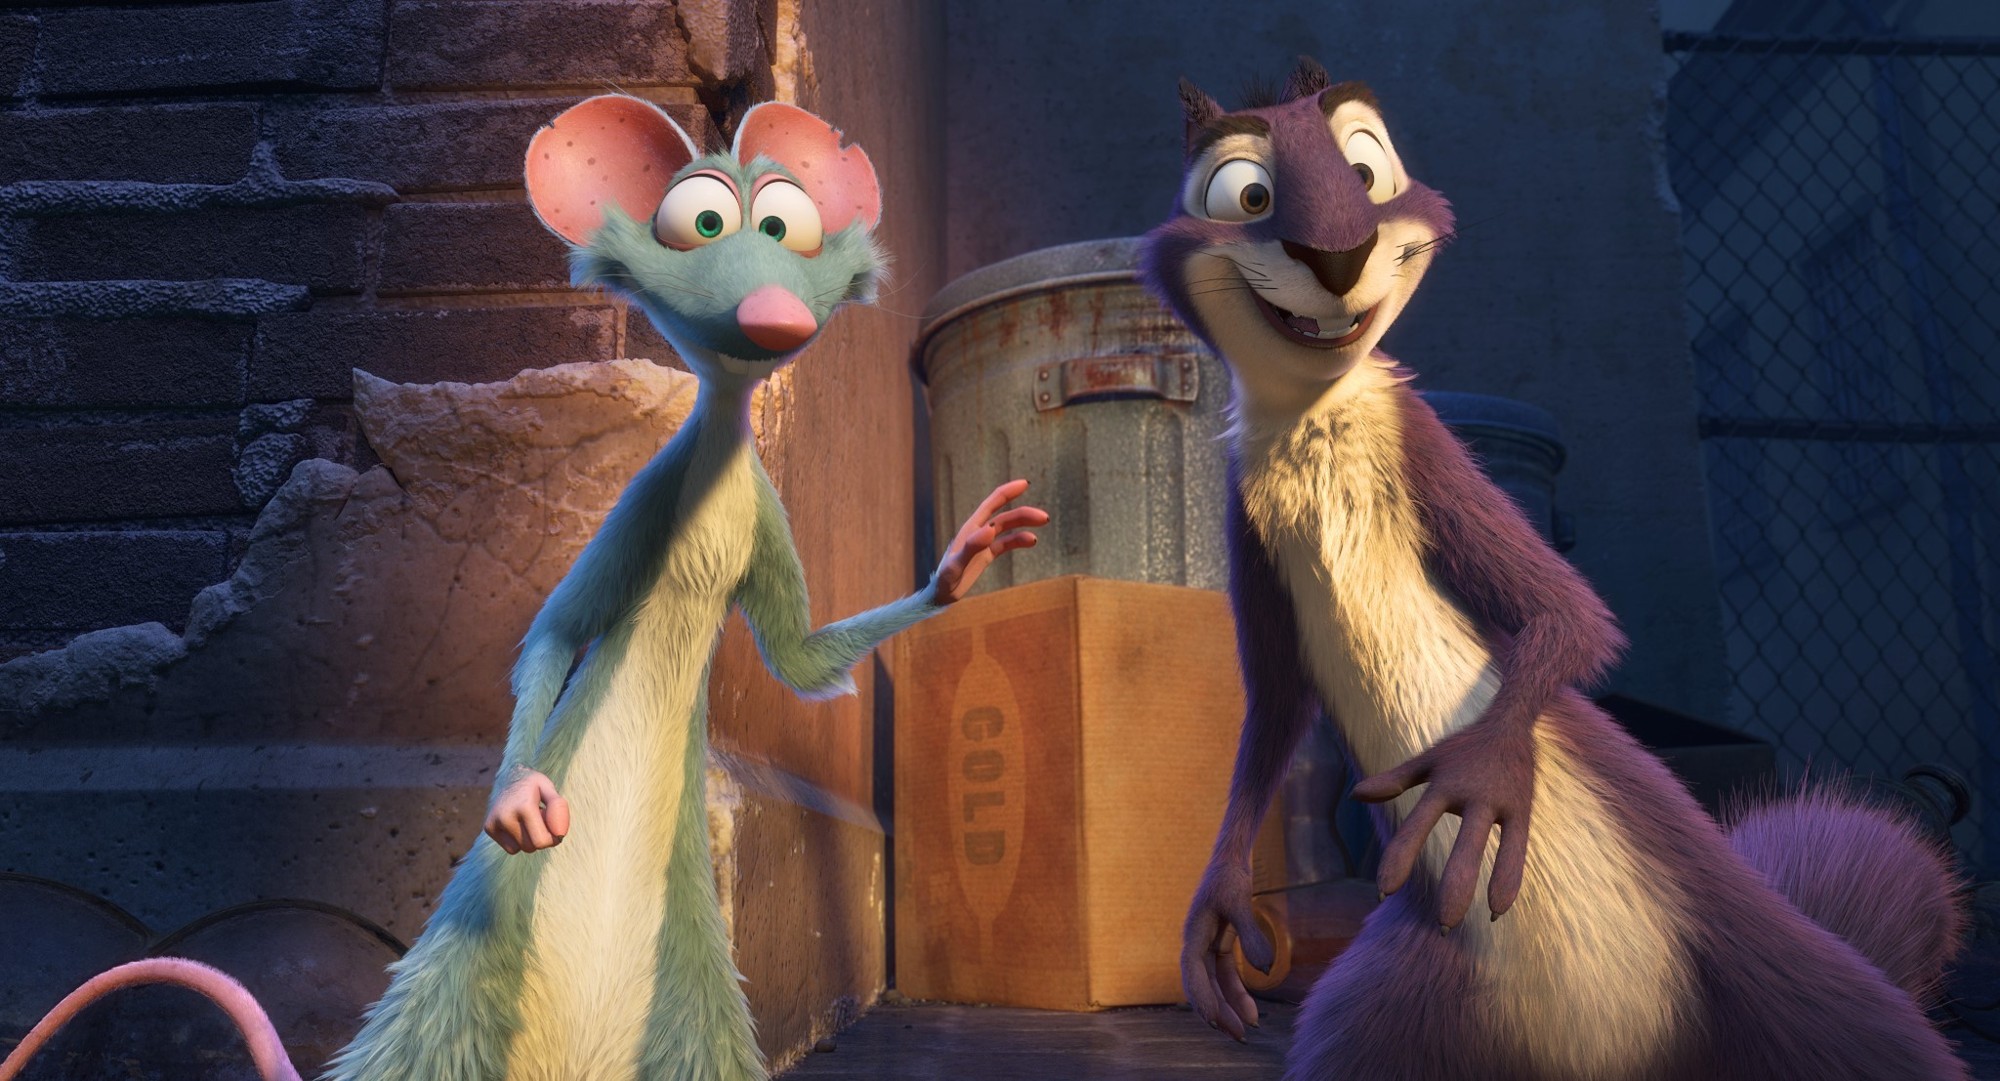 Buddy and Surly from Open Road Films' The Nut Job 2: Nutty by Nature (2017)